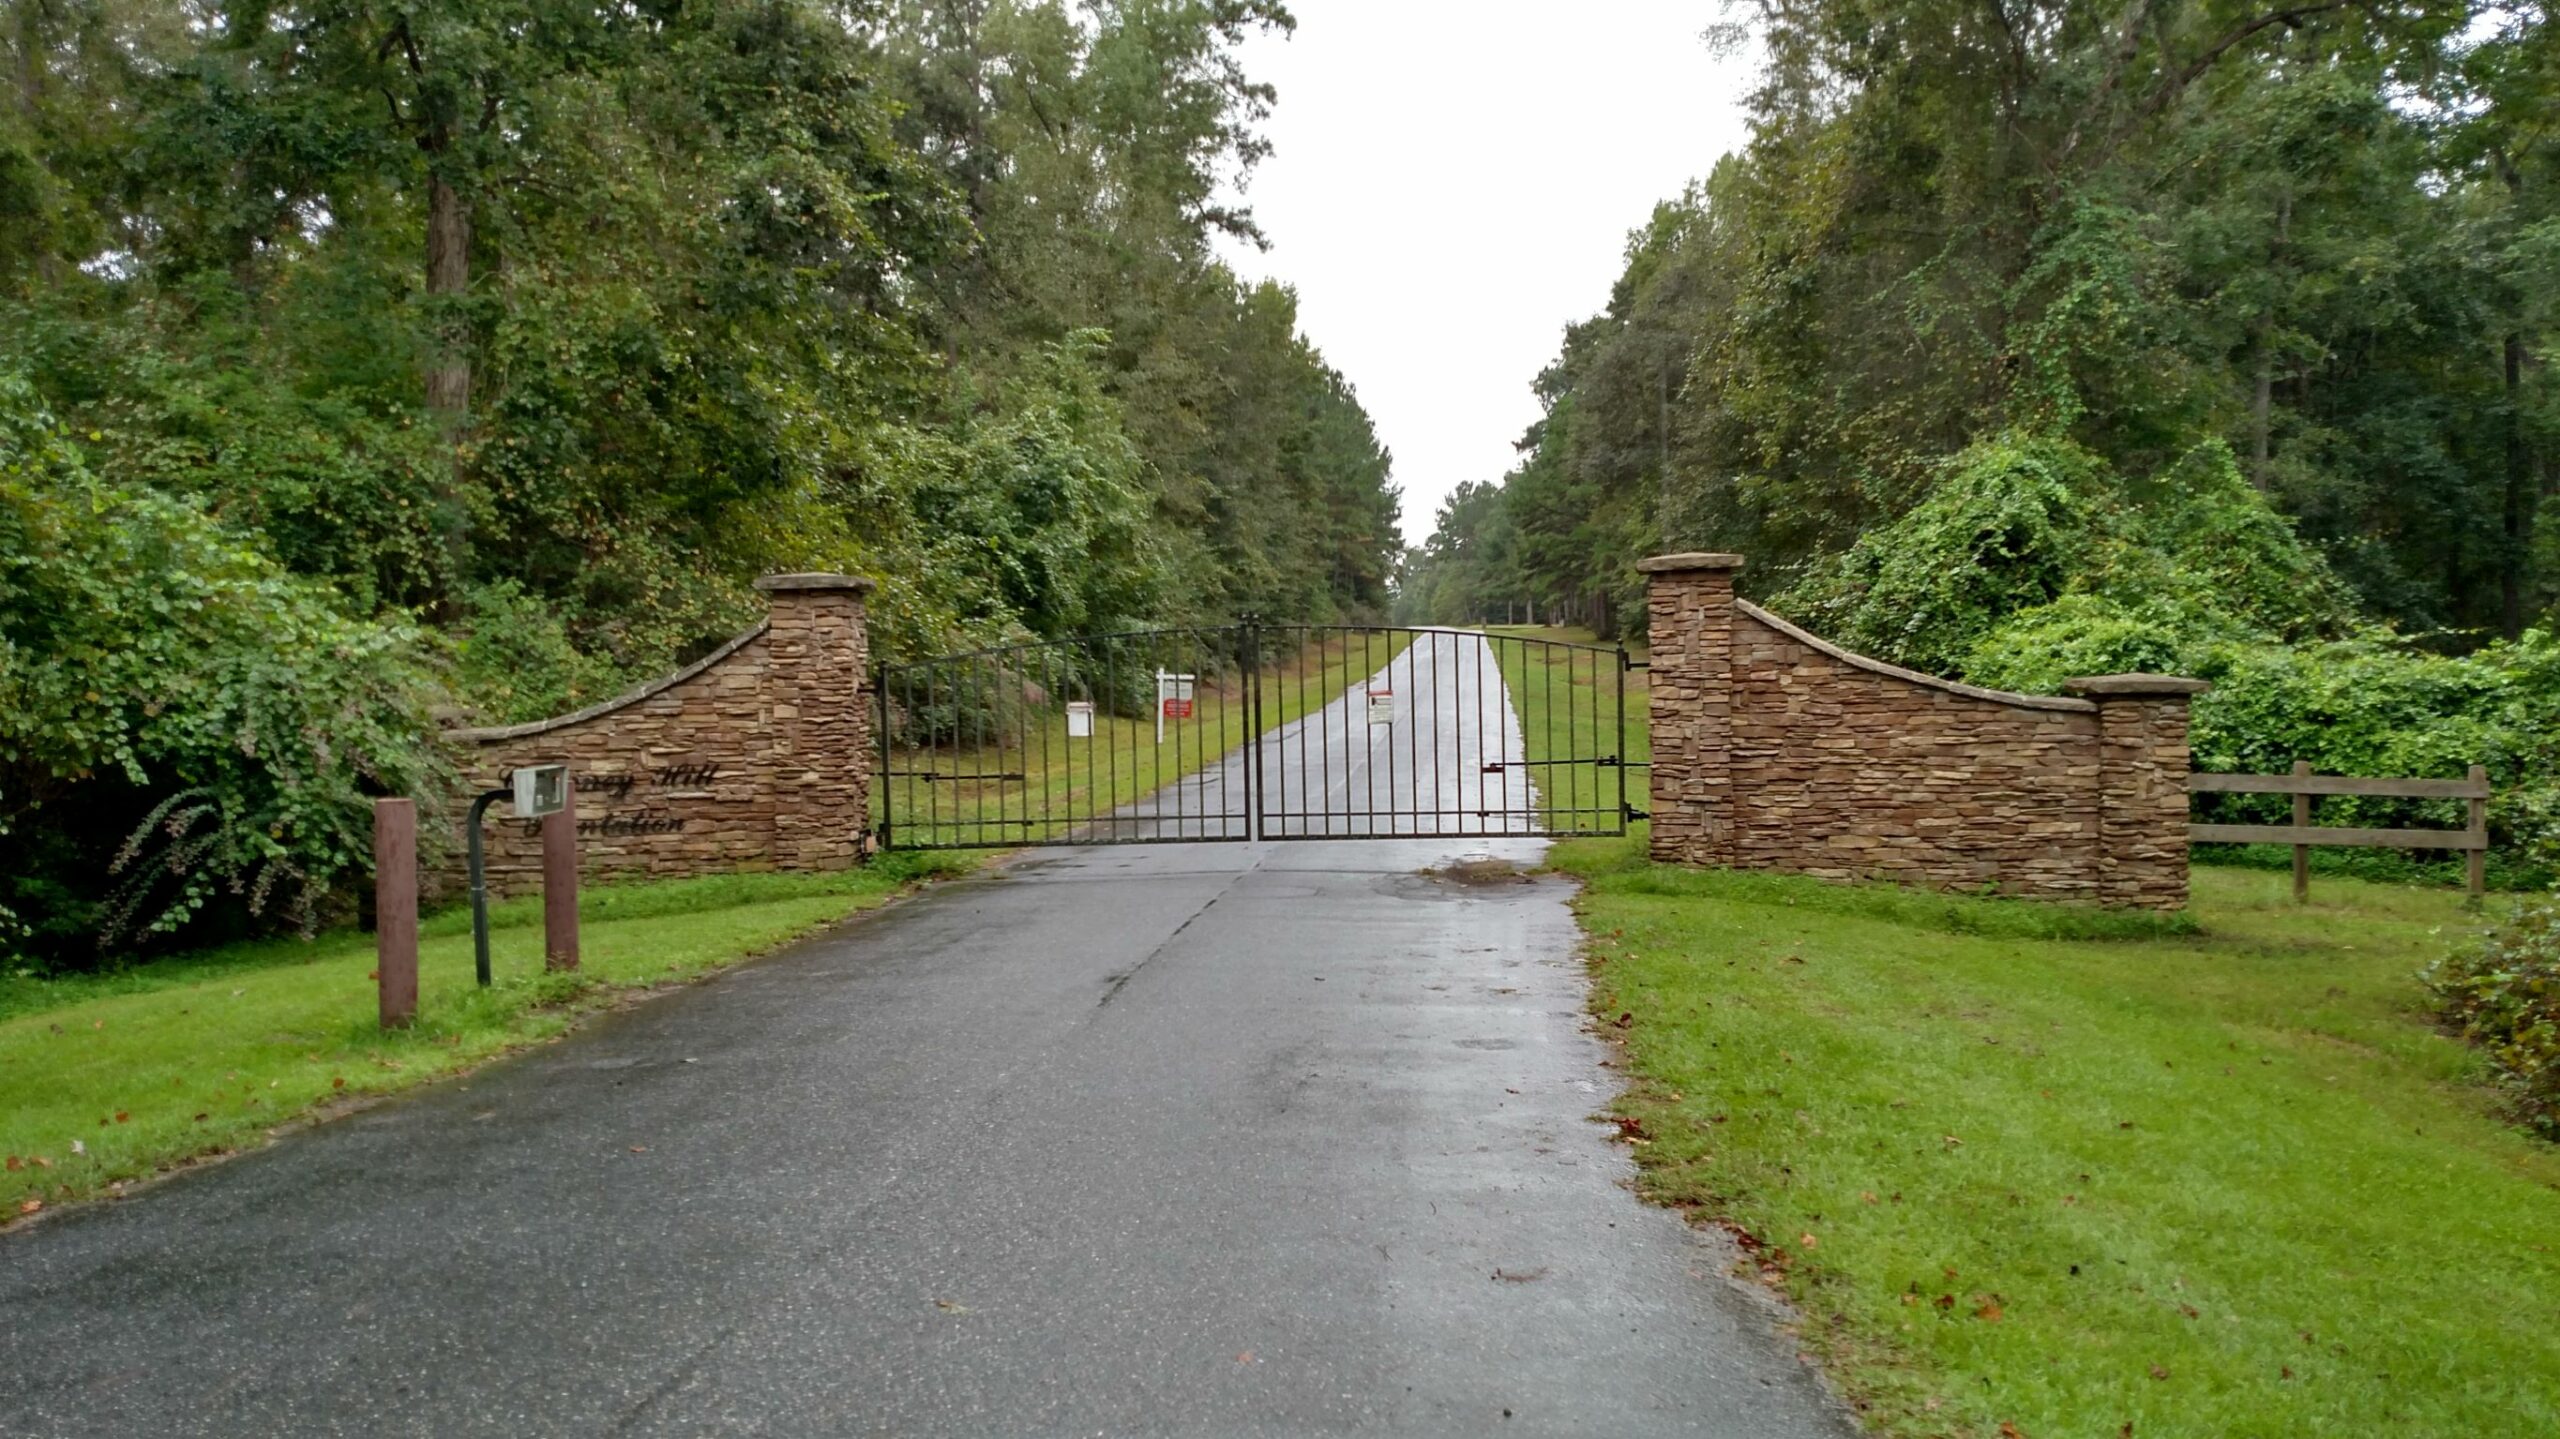 Entrance to gated community in northeast Tallahassee